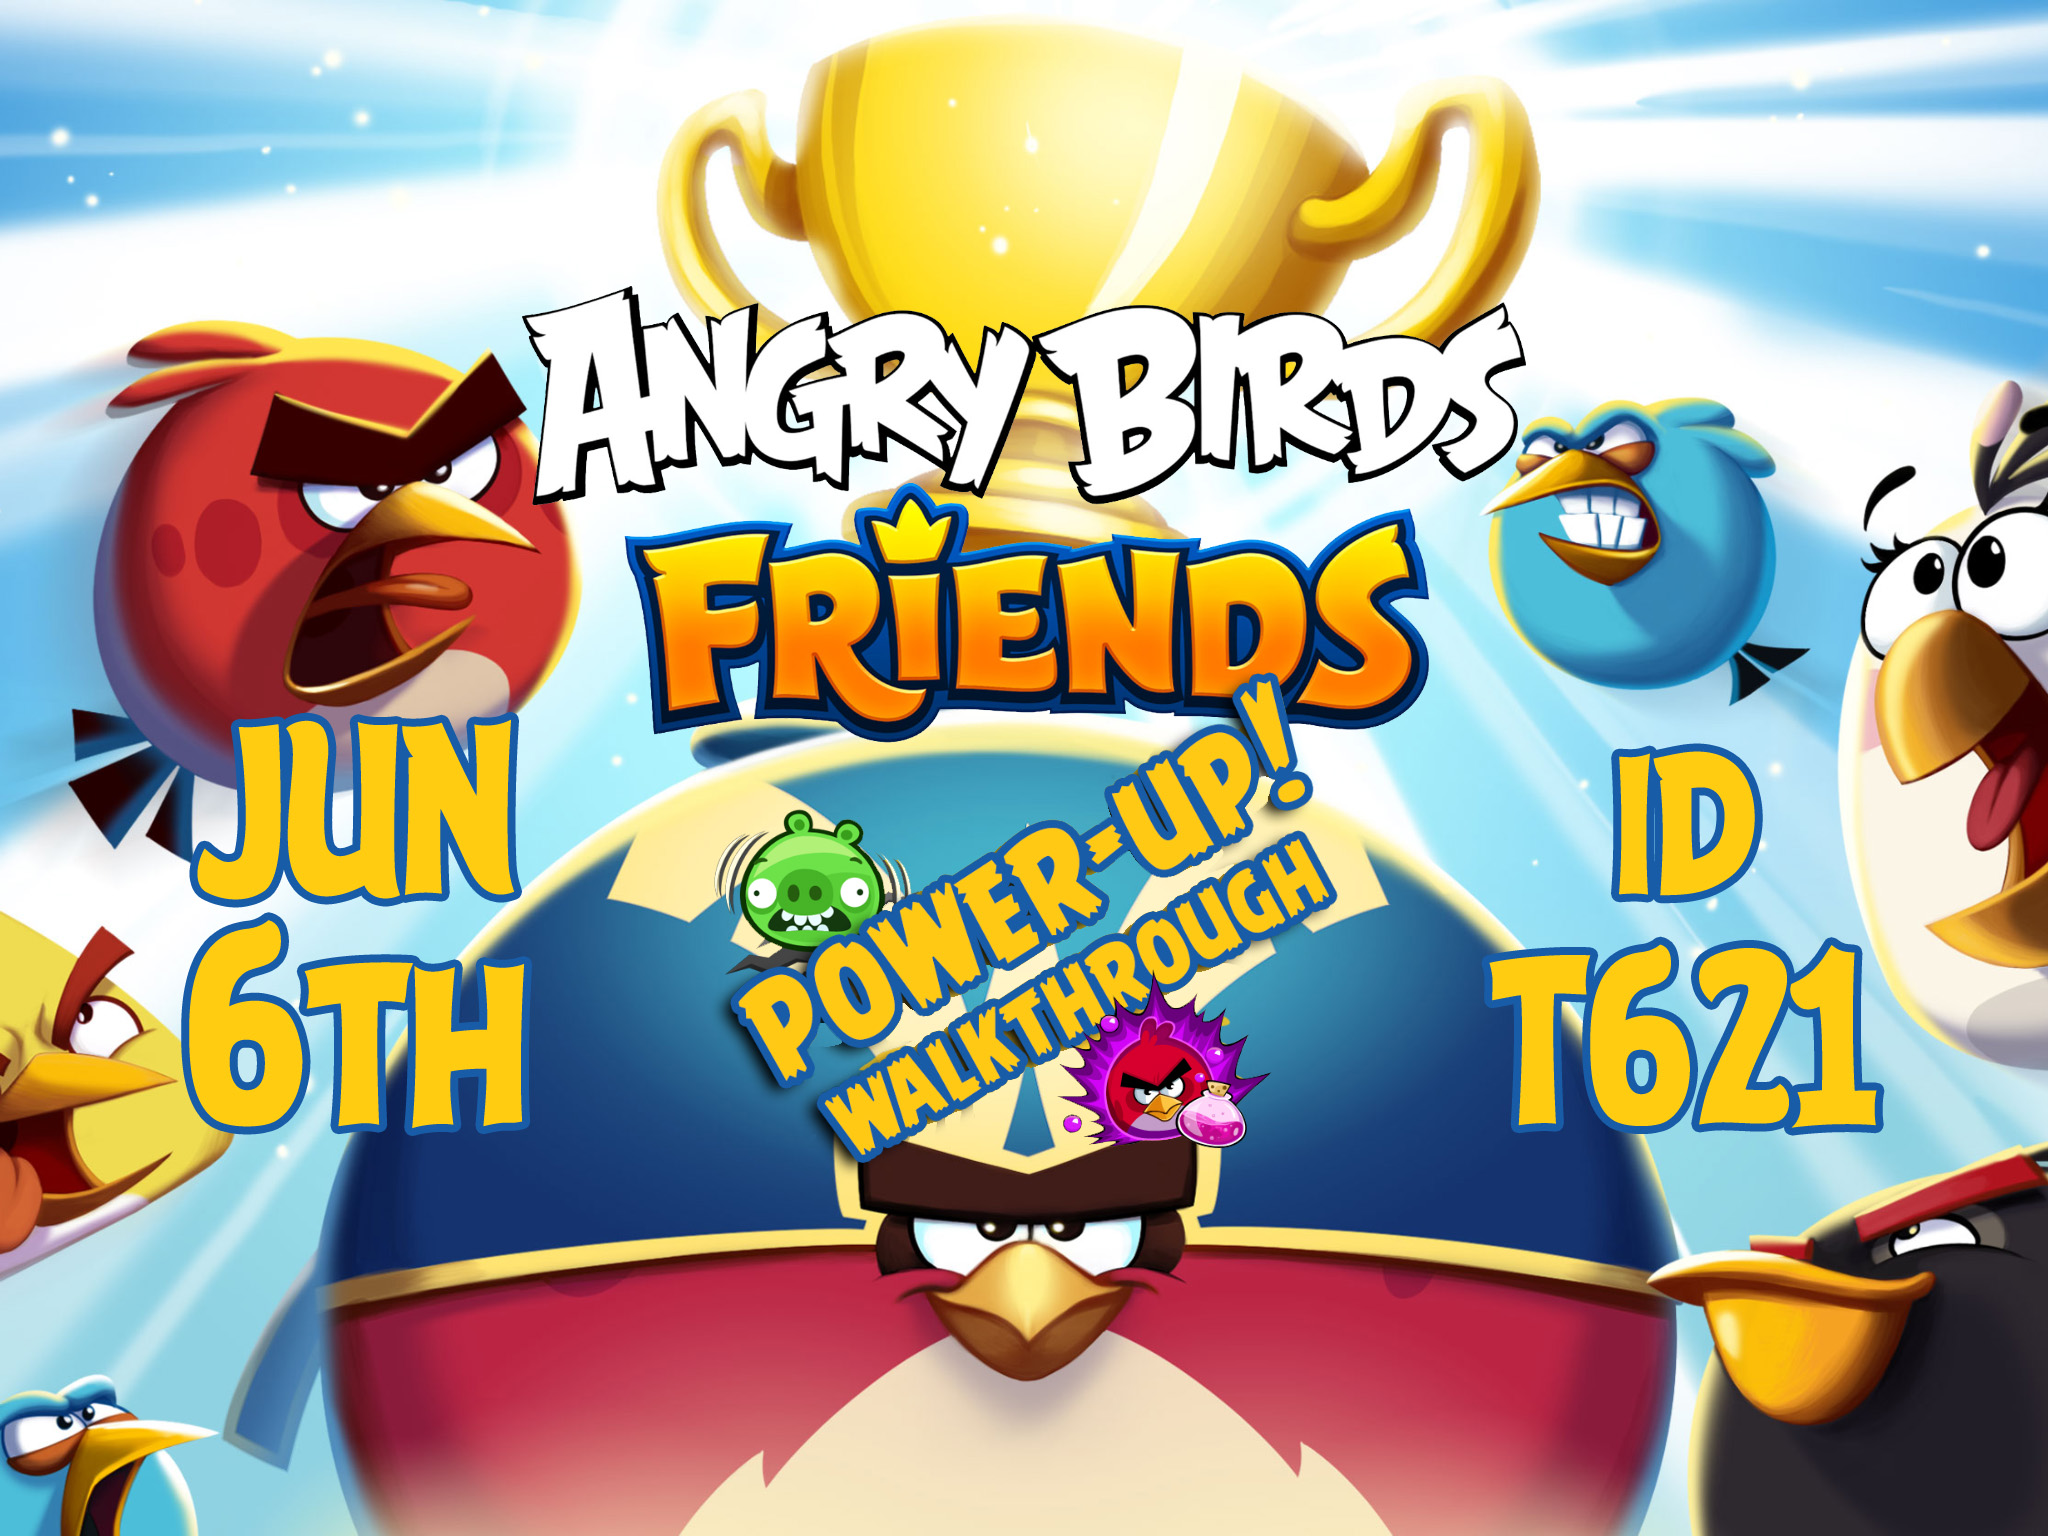 Angry-Birds-Friends-Tournament-T621-Feature-Image-PU